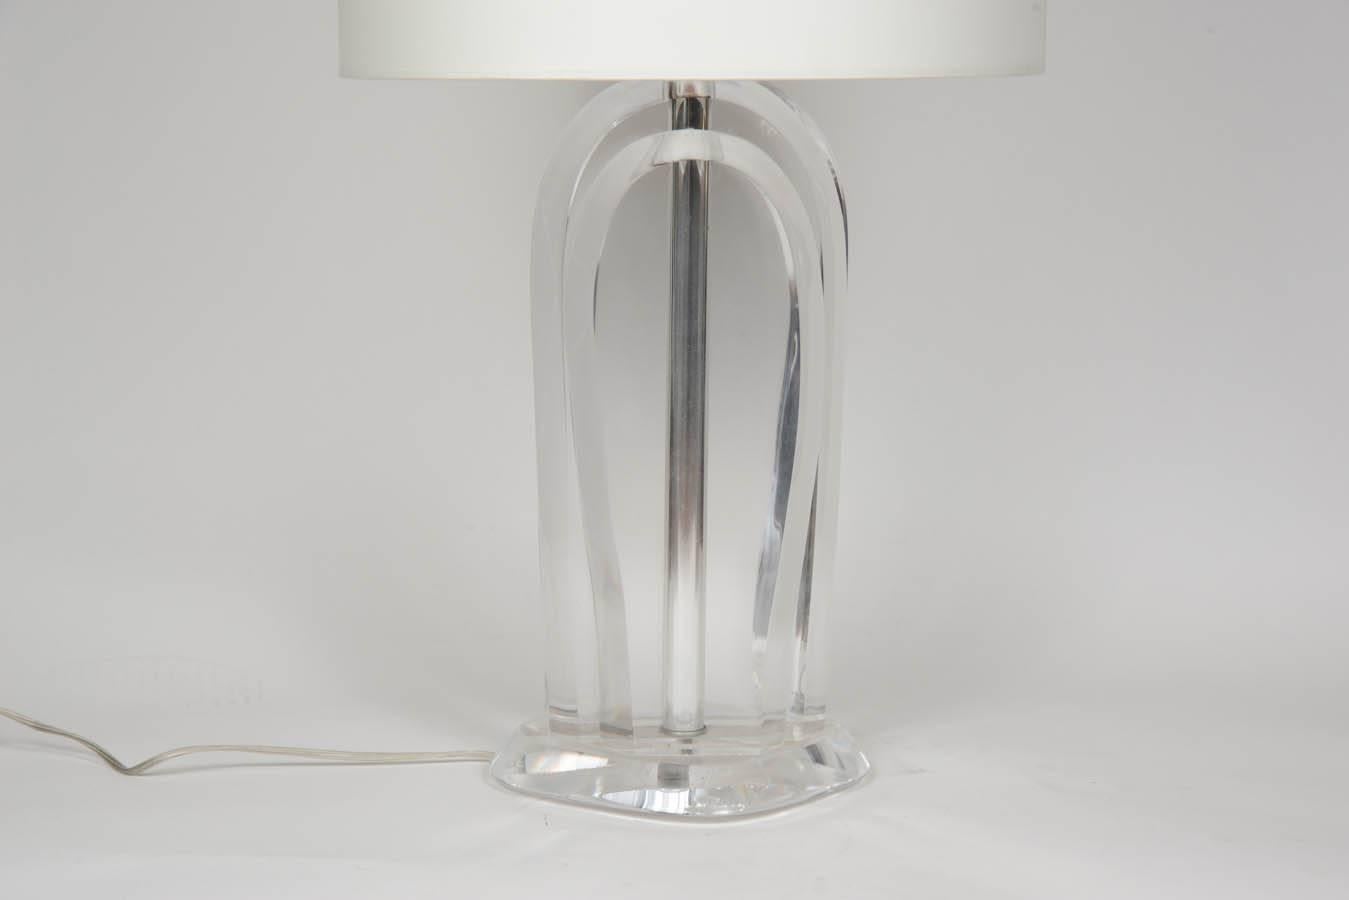 Chic pair of lamps entirely made of Lucite, with a shiny metal stem in the middle supporting the hardware and hiding the wire.